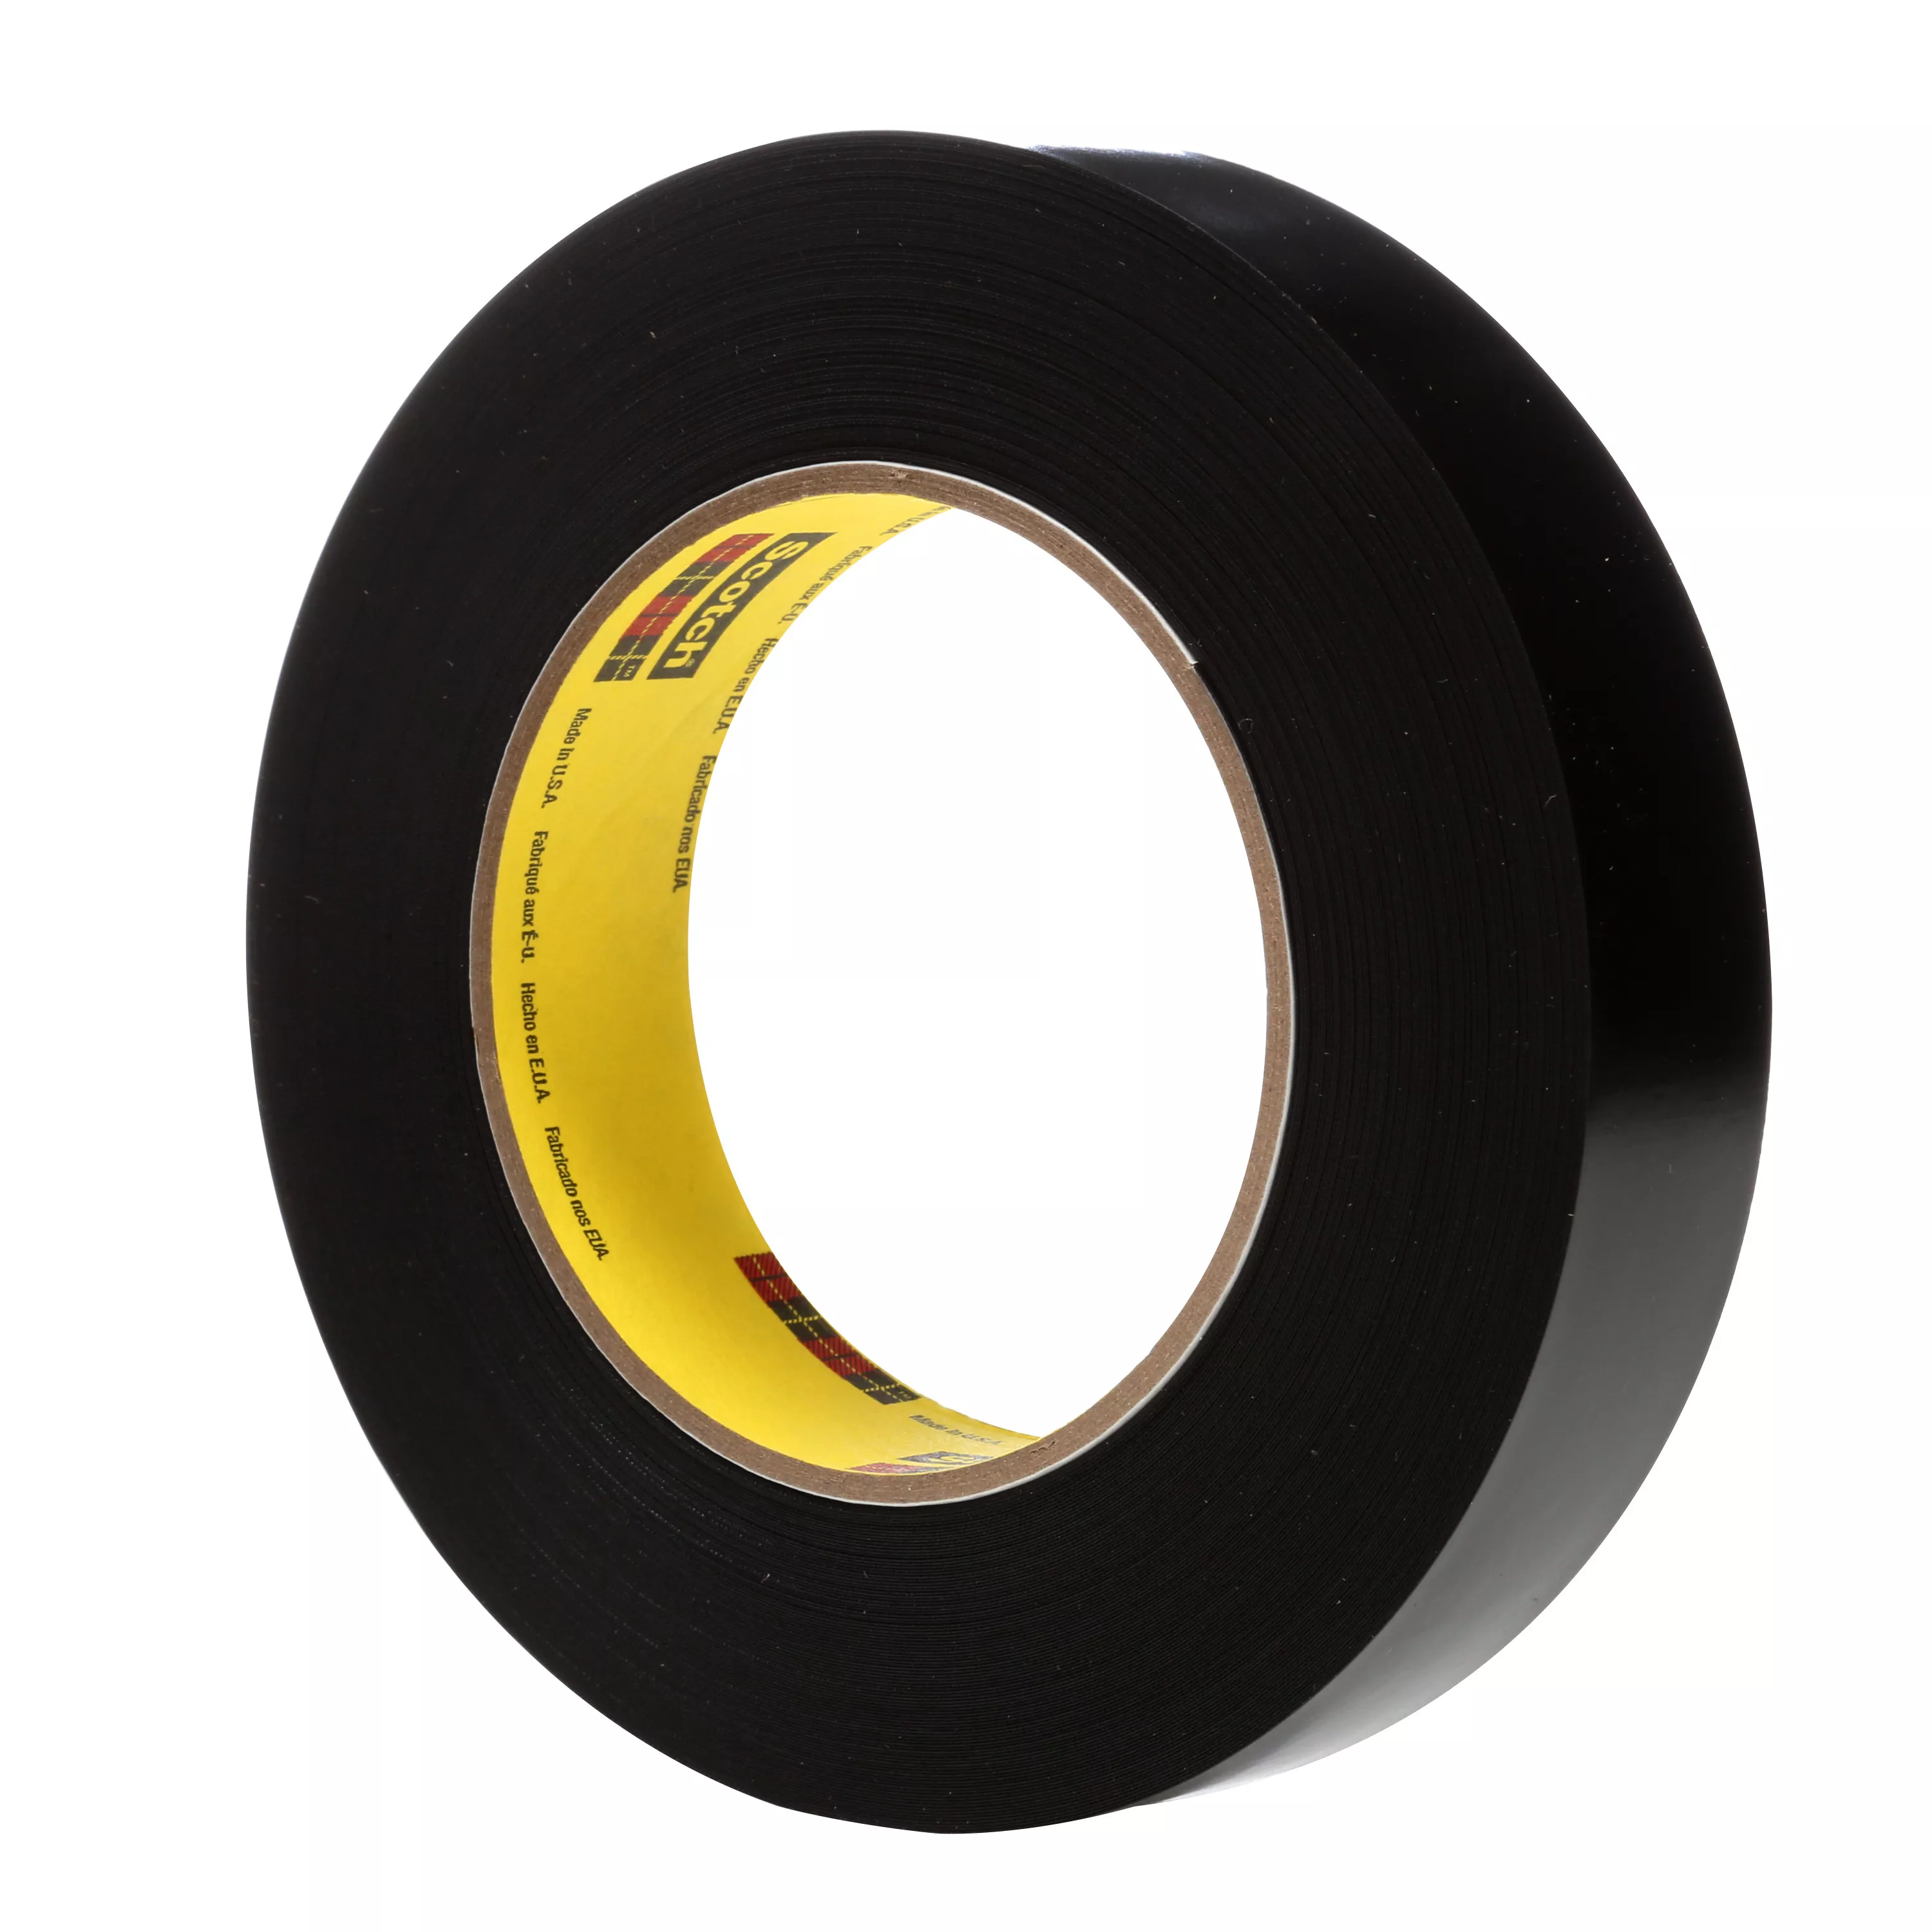 Product Number 472 | 3M™ Vinyl Tape 472